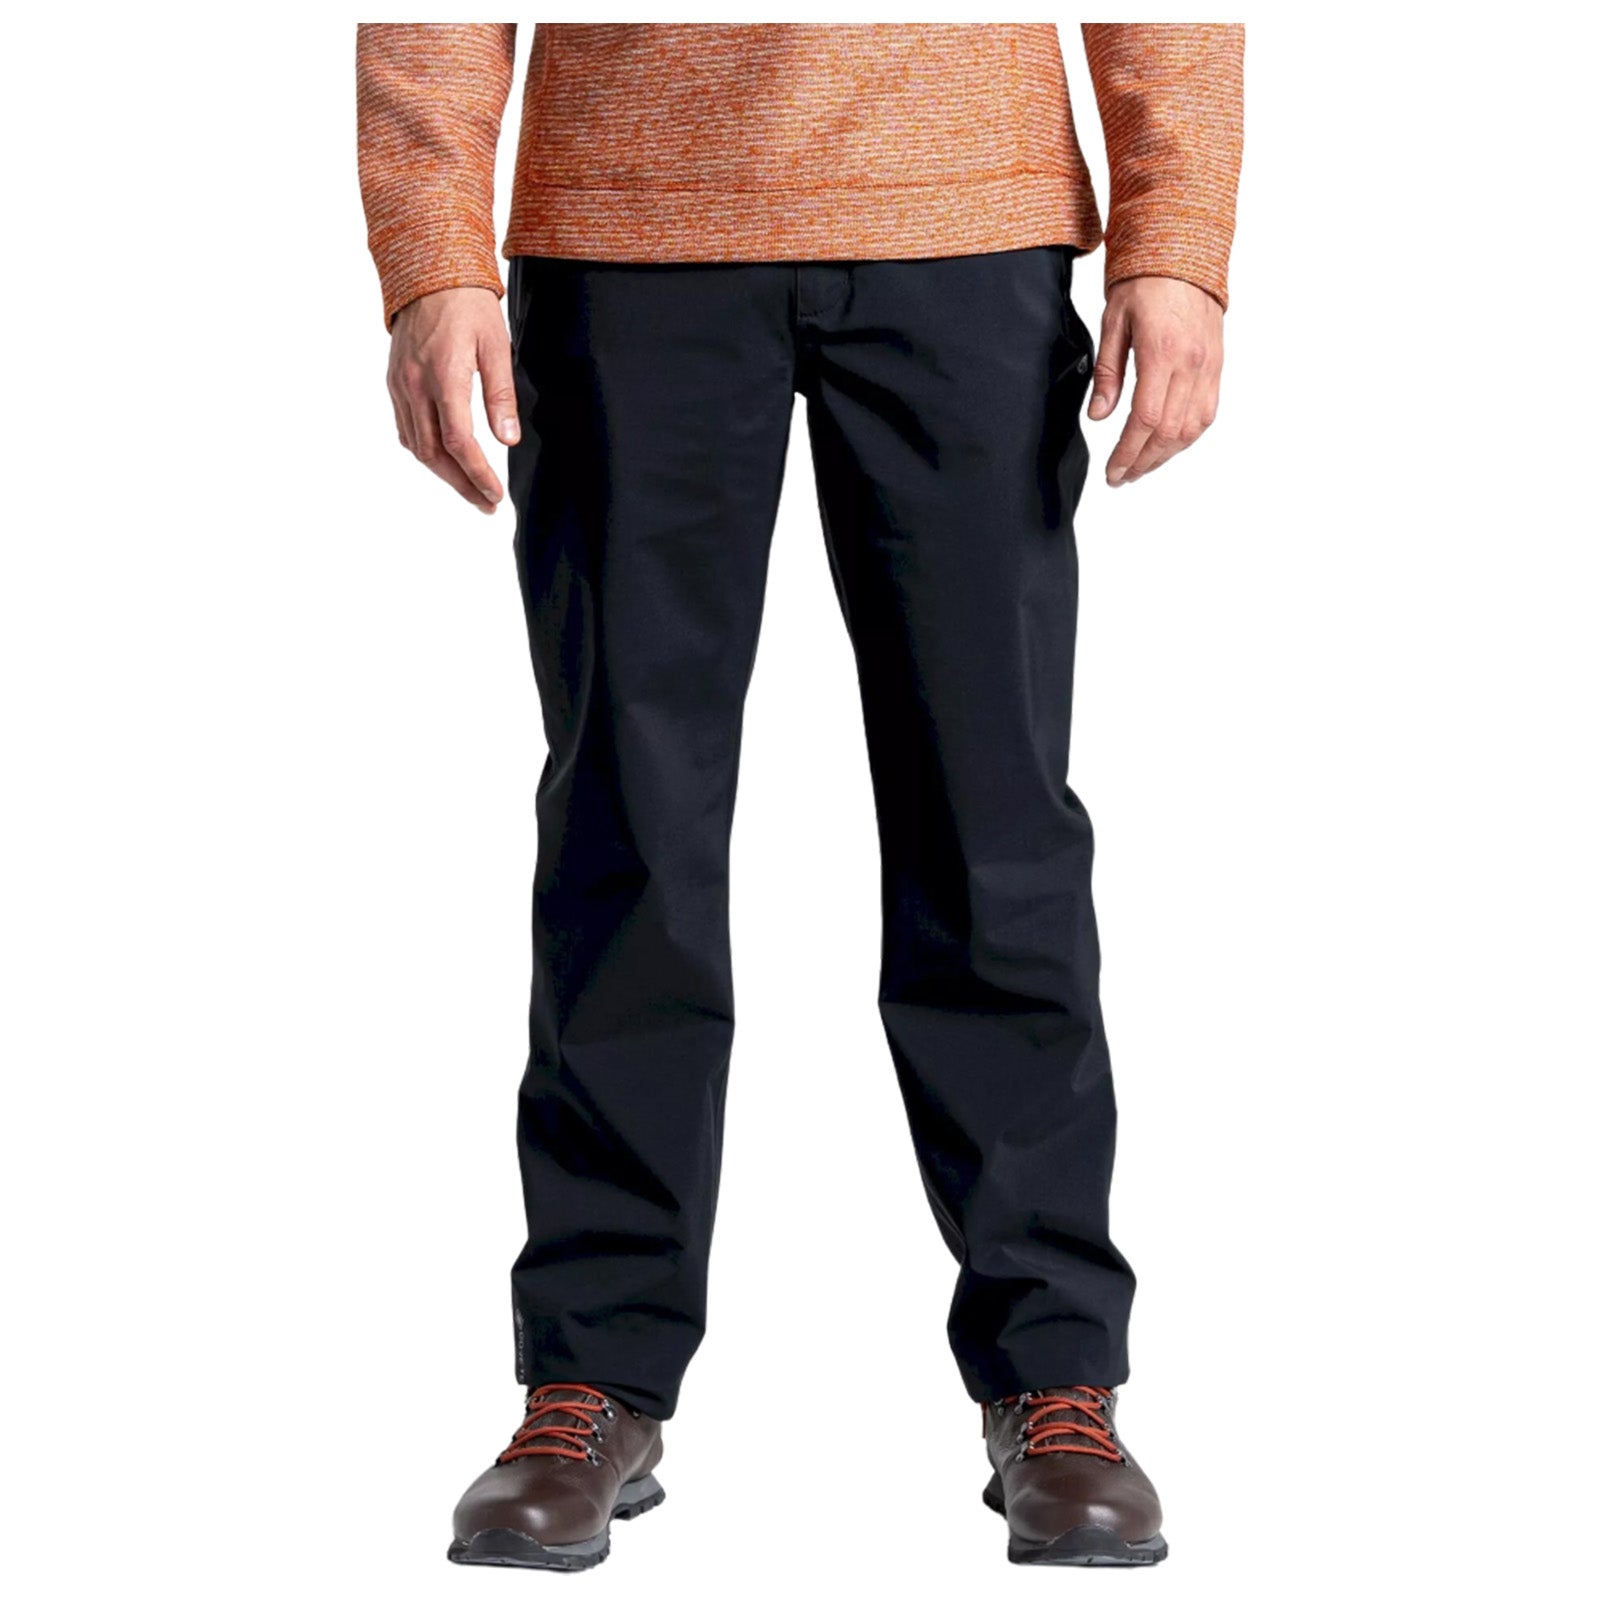 Craghoppers Mens Nogales GORE-TEX Waterproof Trousers – More Sports